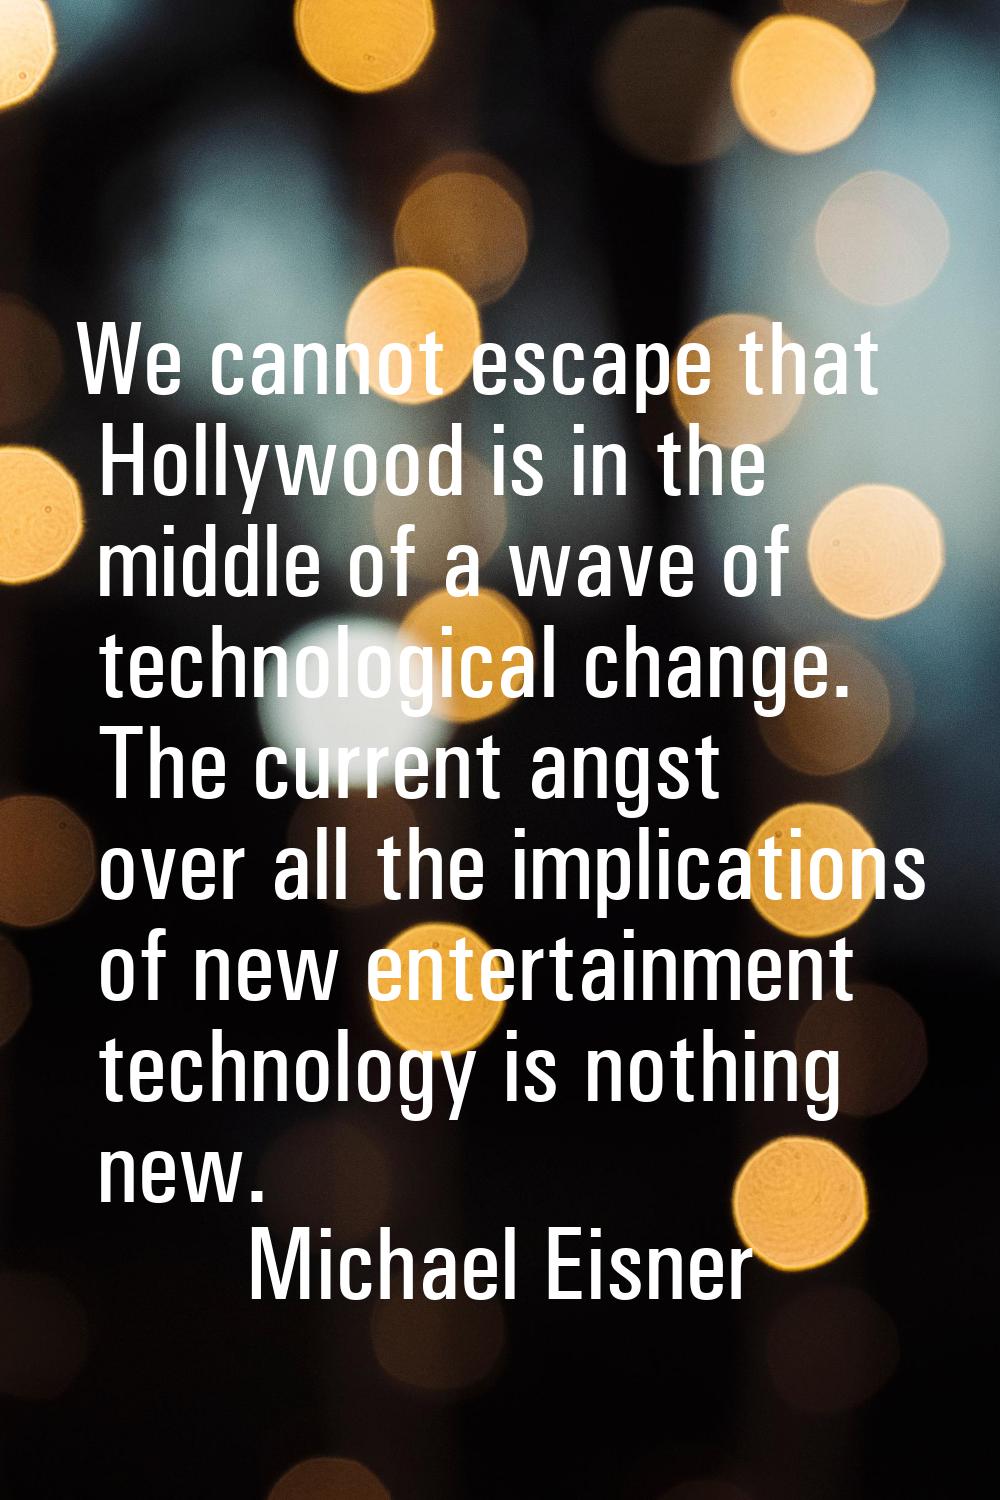 We cannot escape that Hollywood is in the middle of a wave of technological change. The current ang